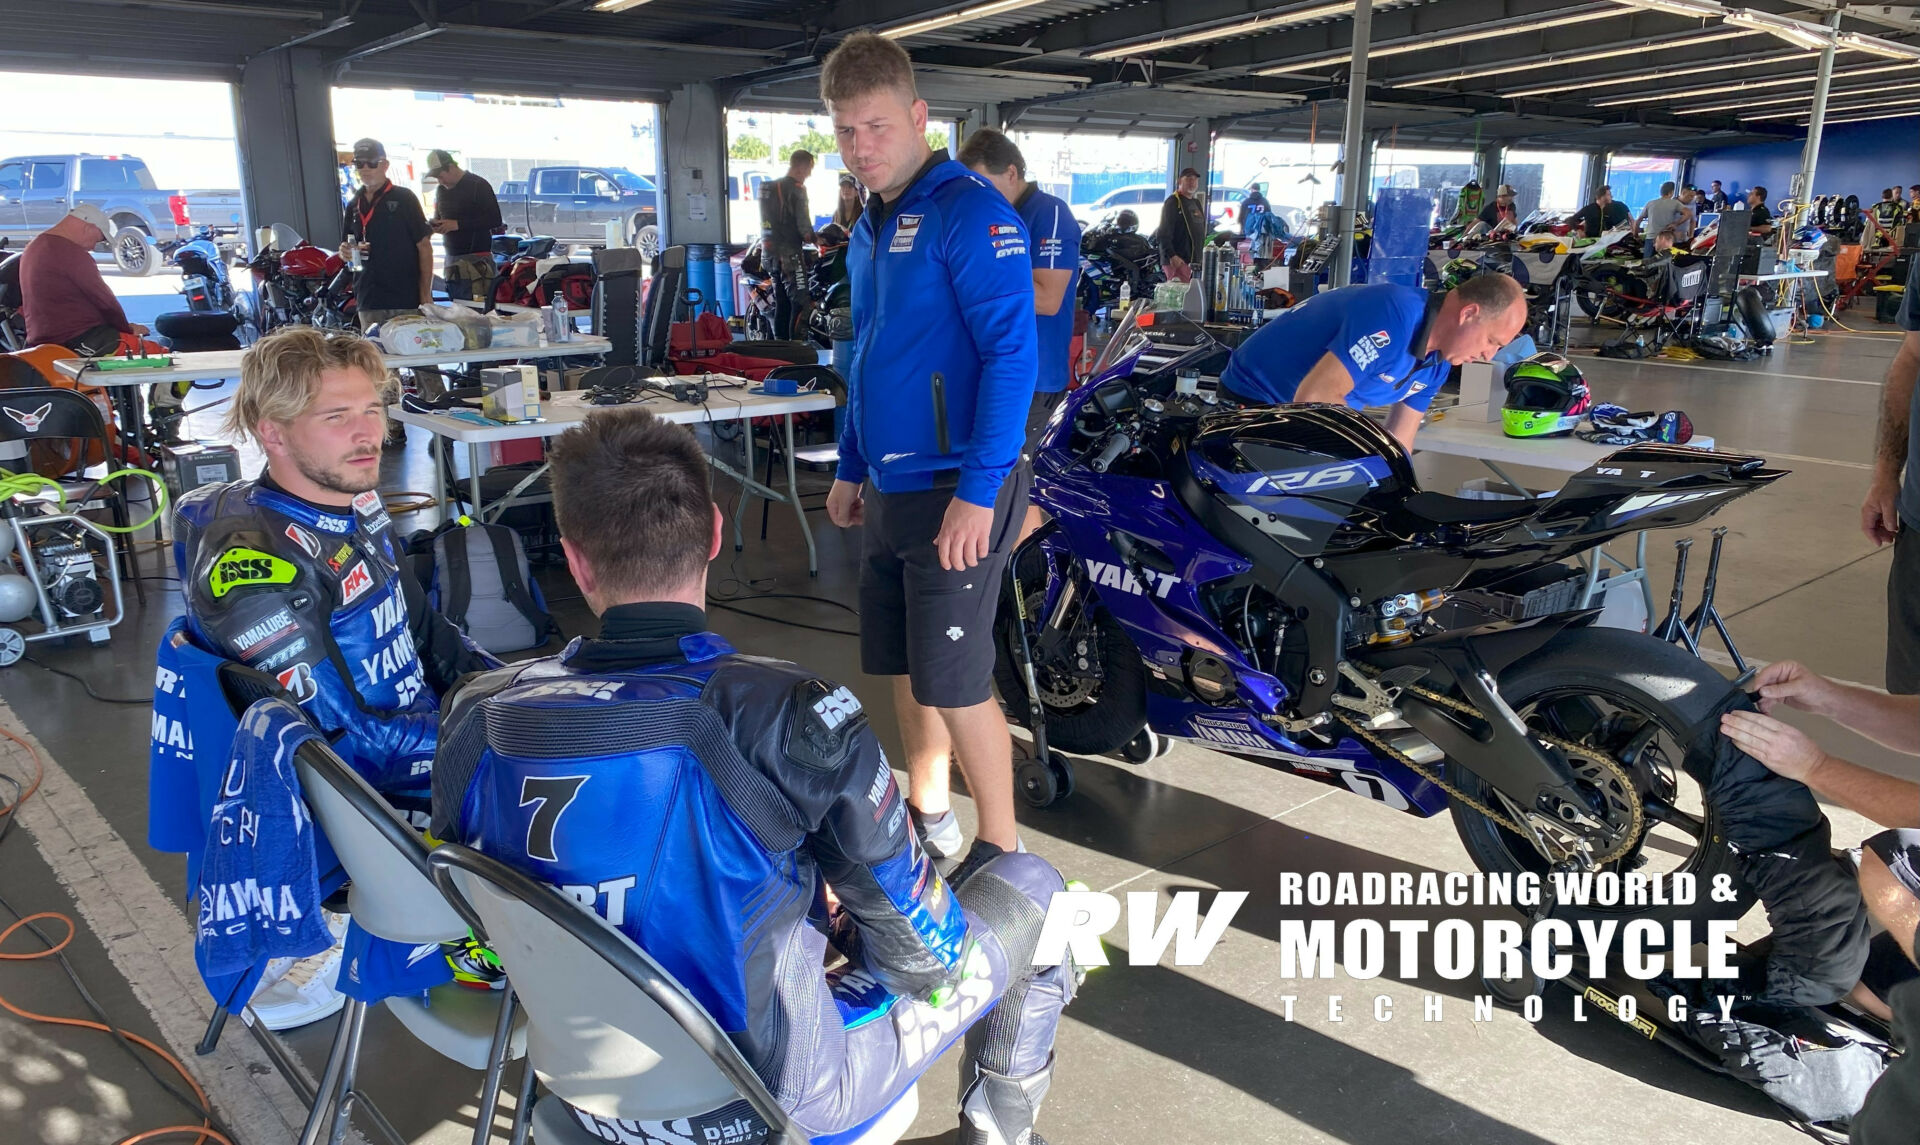 YART Yamaha's newly crowned FIM Endurance World Champions Karel Hanika (seated far left) and Marvin Fritz (seated second from left) are at Daytona International Speedway testing ahead of an assault on the 2024 Daytona 200. Photo by David Swarts.